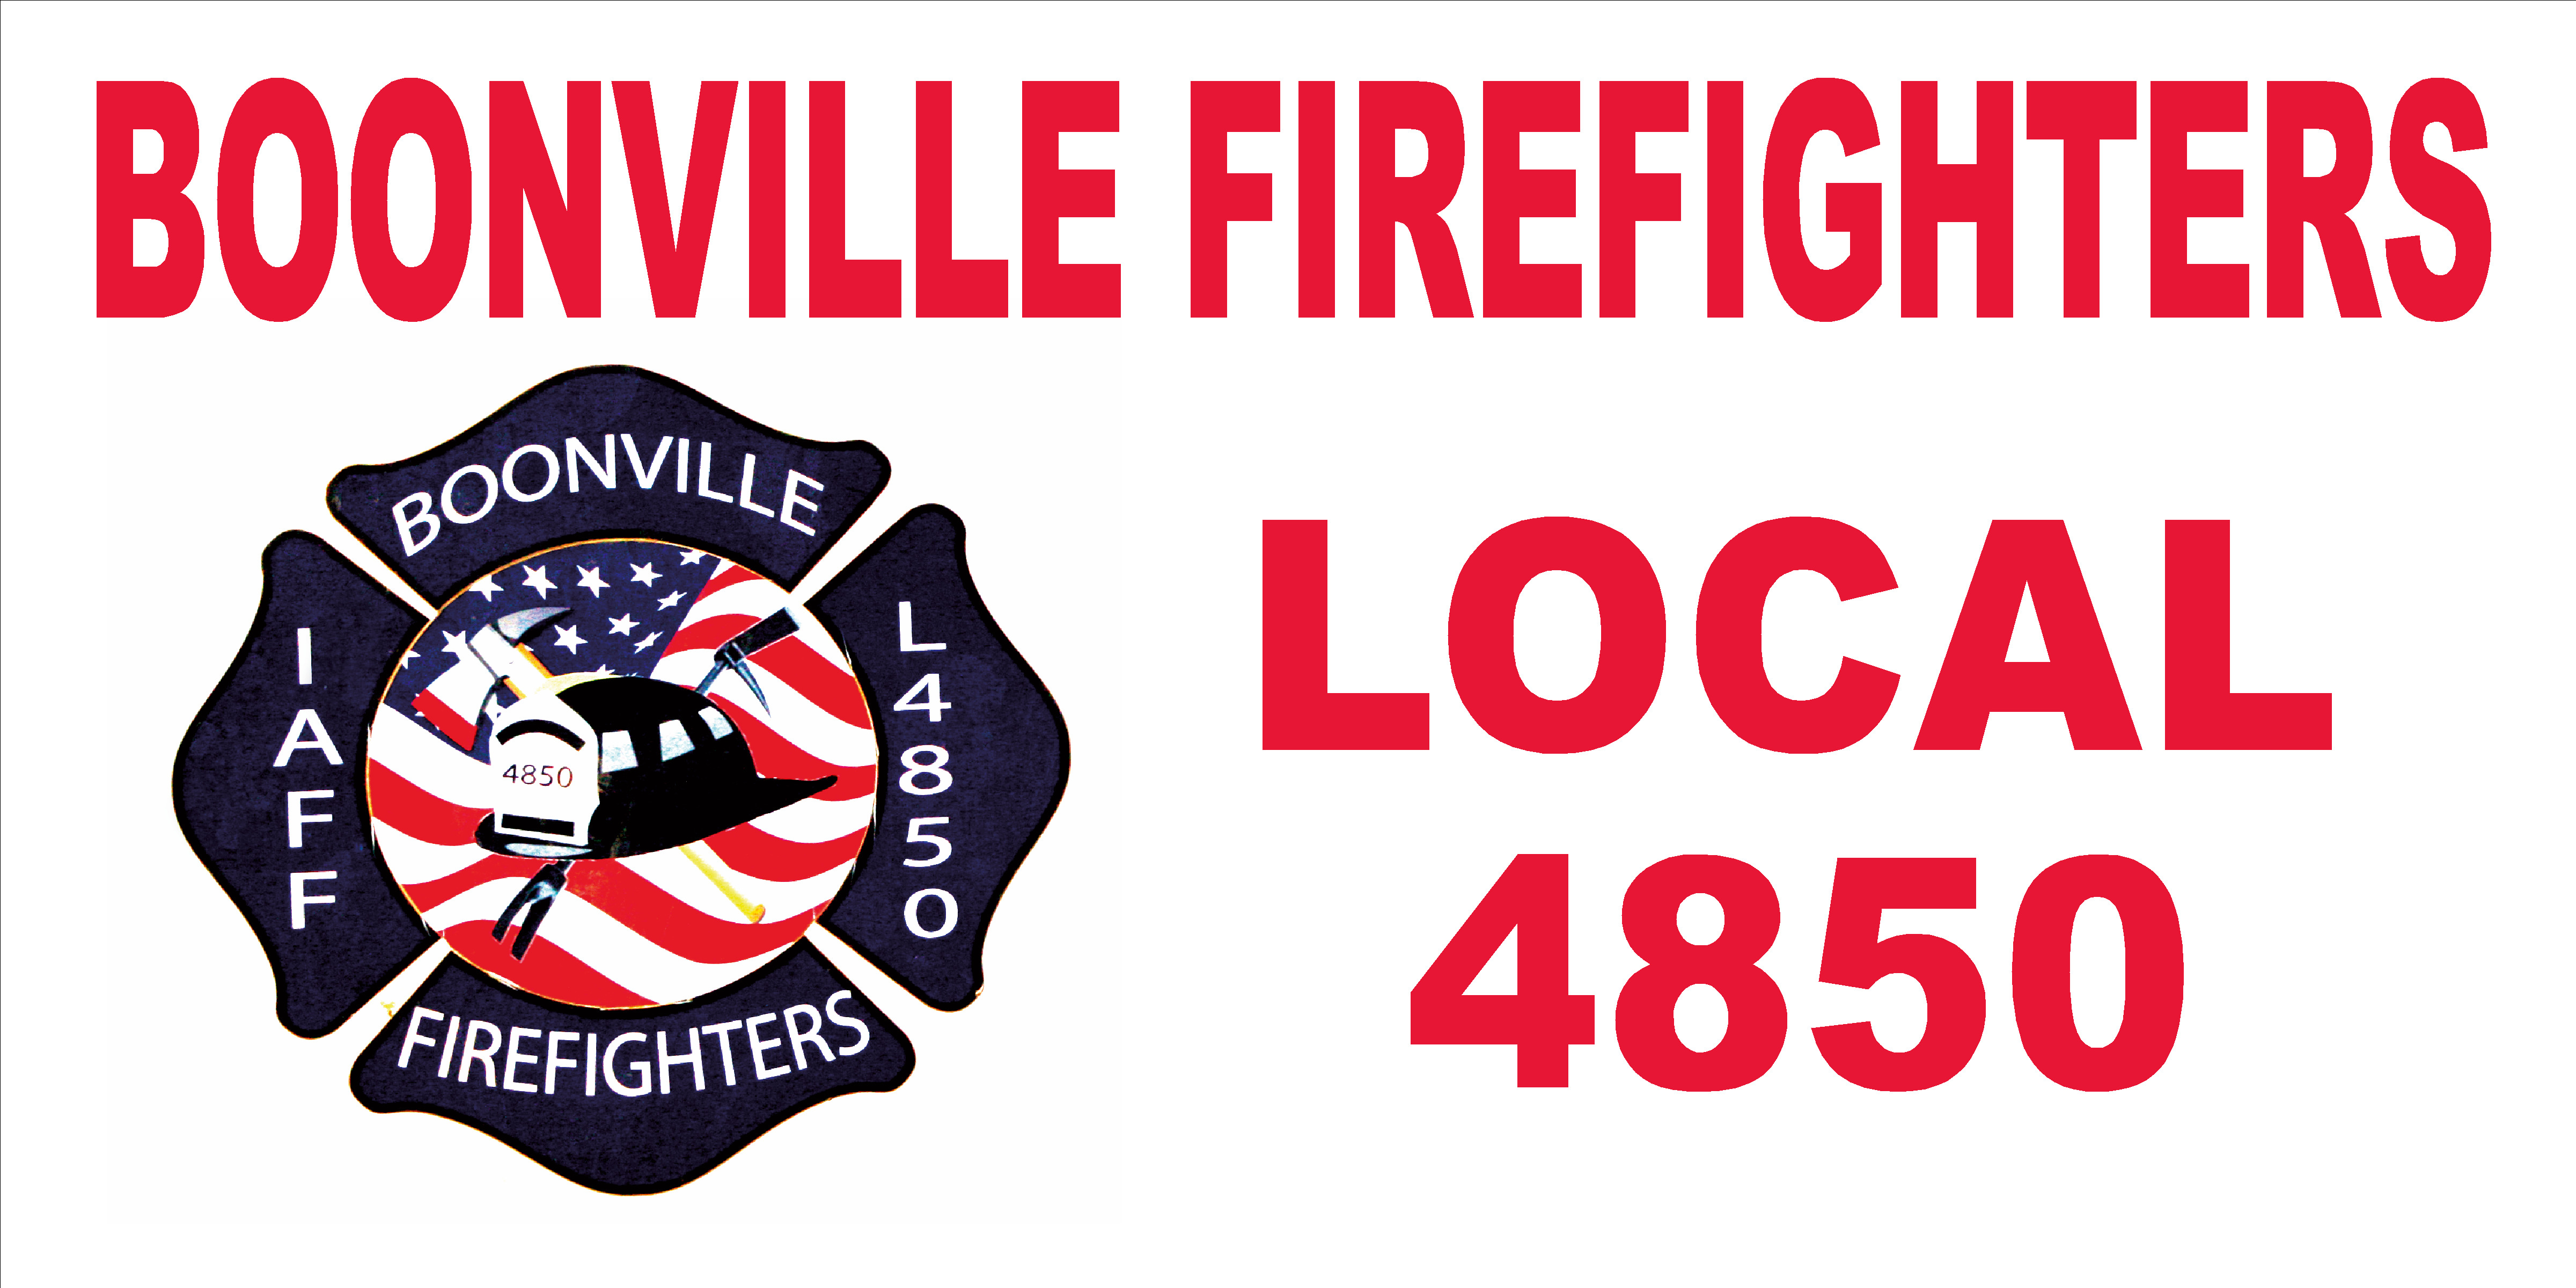 Boonville-Firefighters-4850